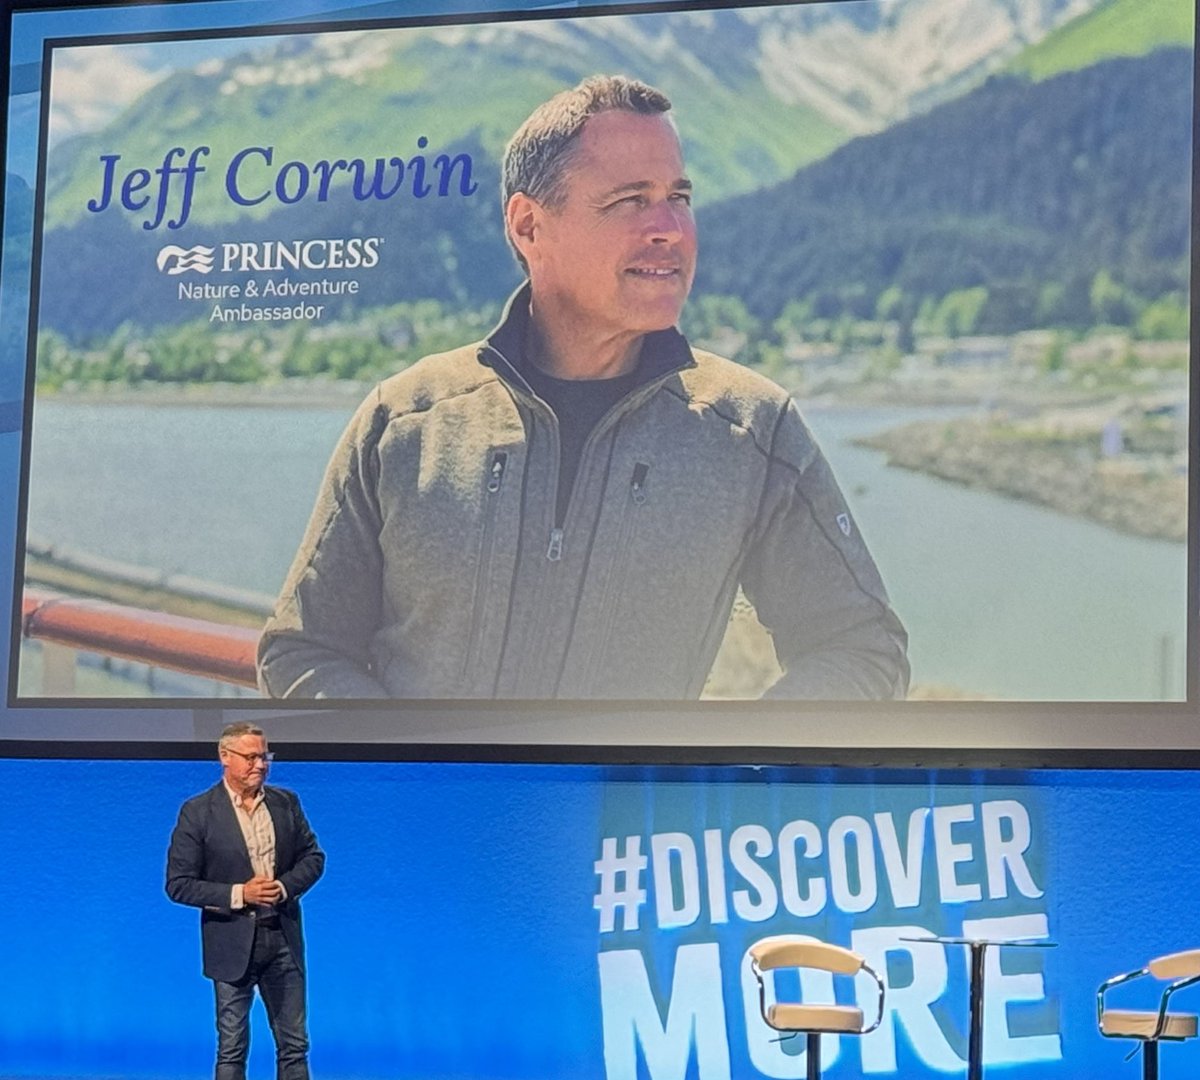 The sustainability of cruise holidays is second to none with modern advancements e.g shore power, vast amounts of recycling A cruise holiday is a great way to explore our natural world in a green way says Jeff Corwin, American naturalist and tv presenter #DiscoverMore